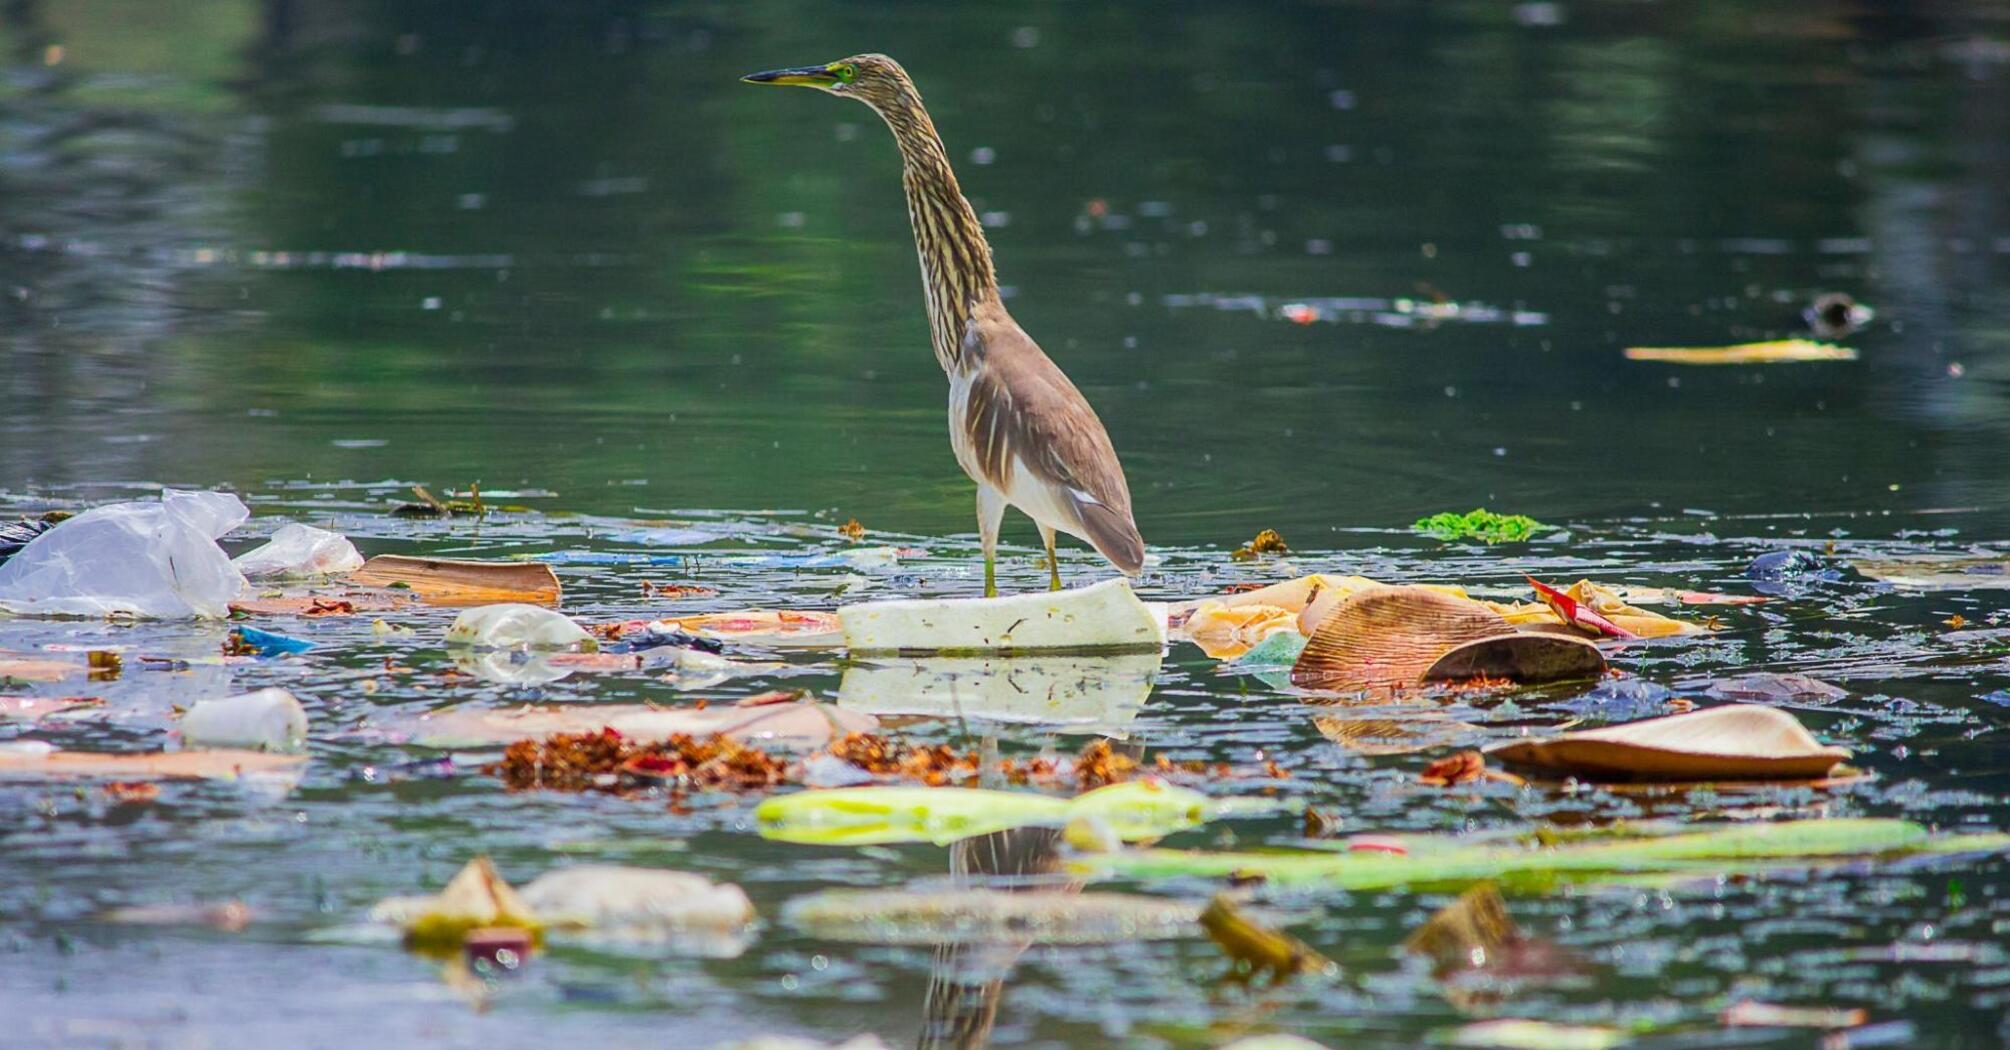 The bird stands on garbage floating in polluted water